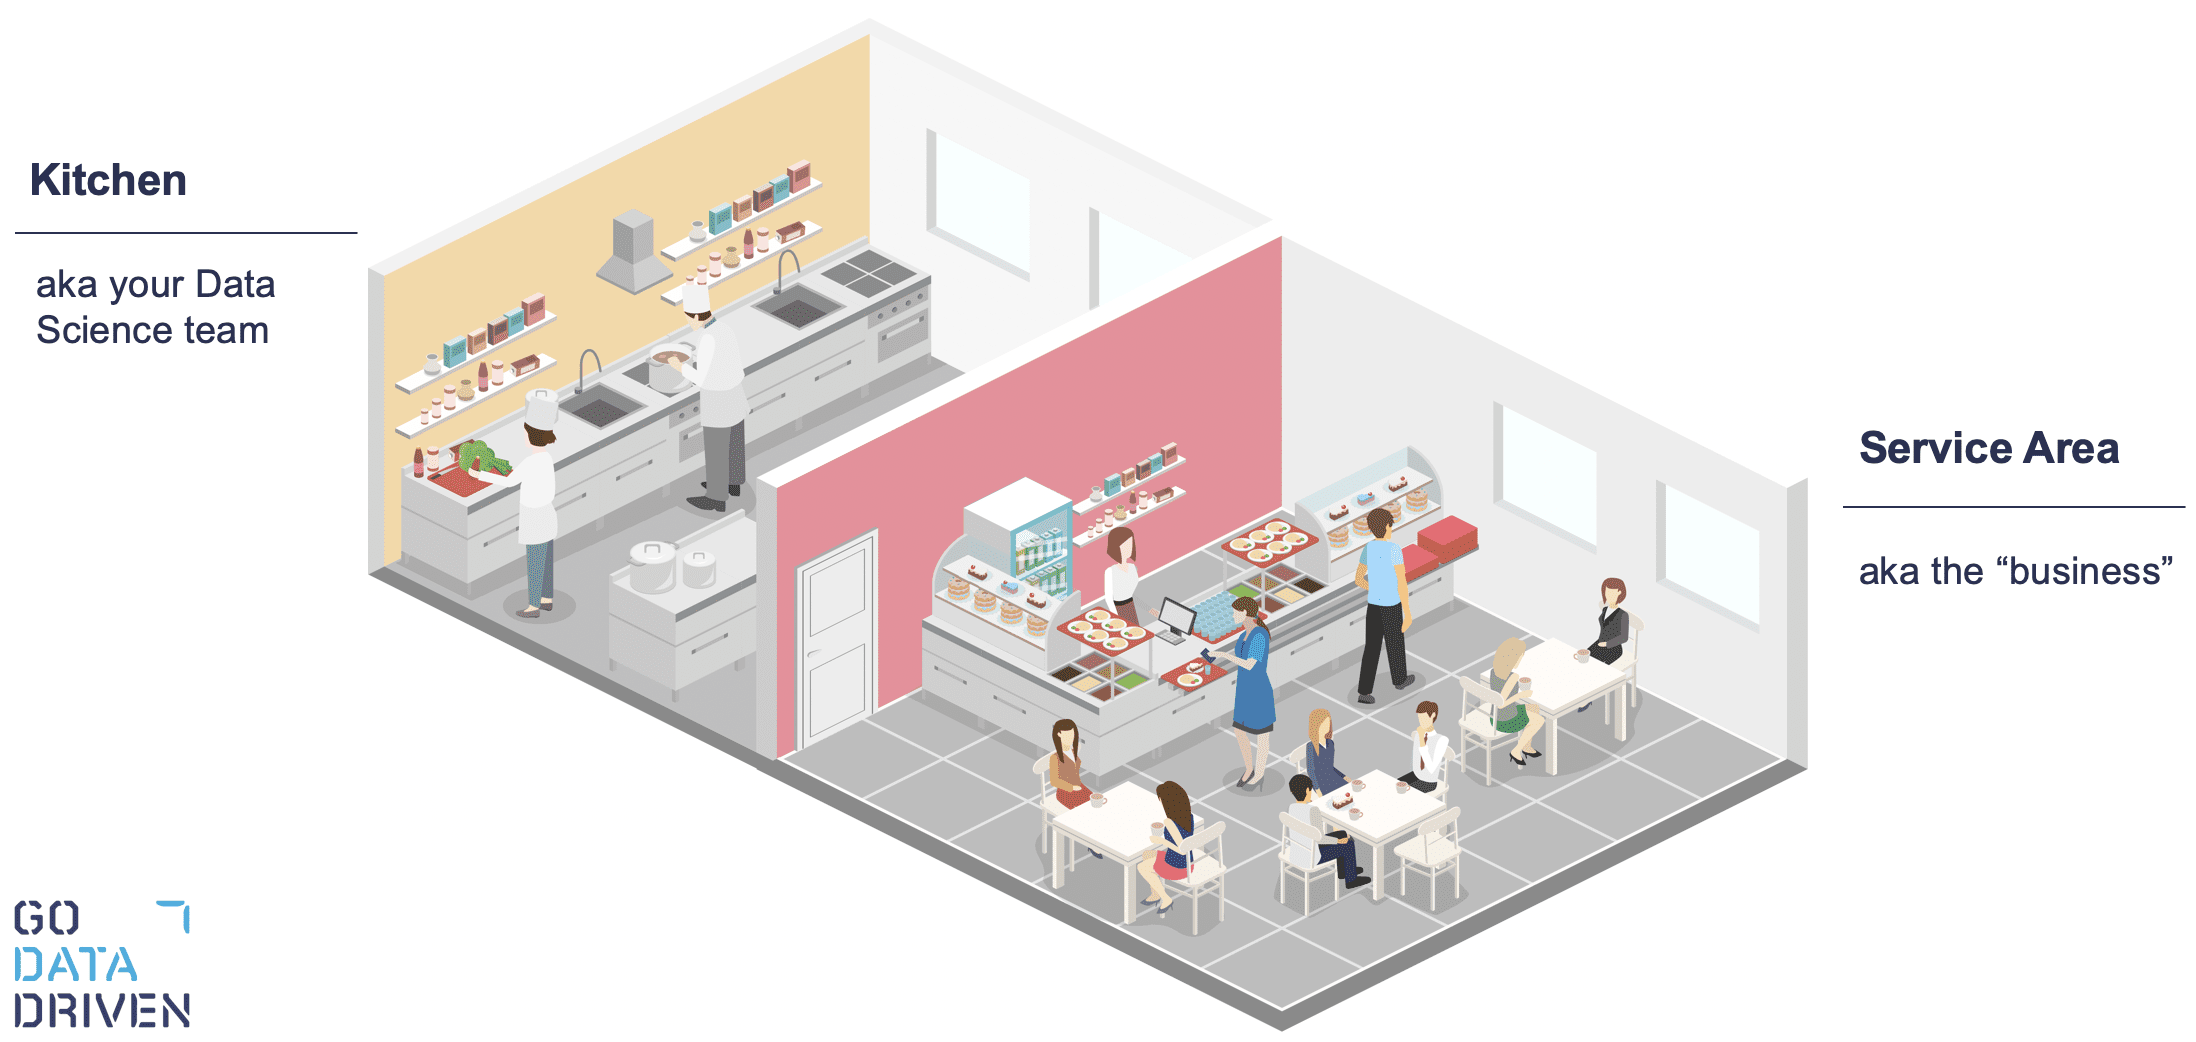 Cross section of a restaurant showing there are two parts that need to work together: the kitchen and service area.